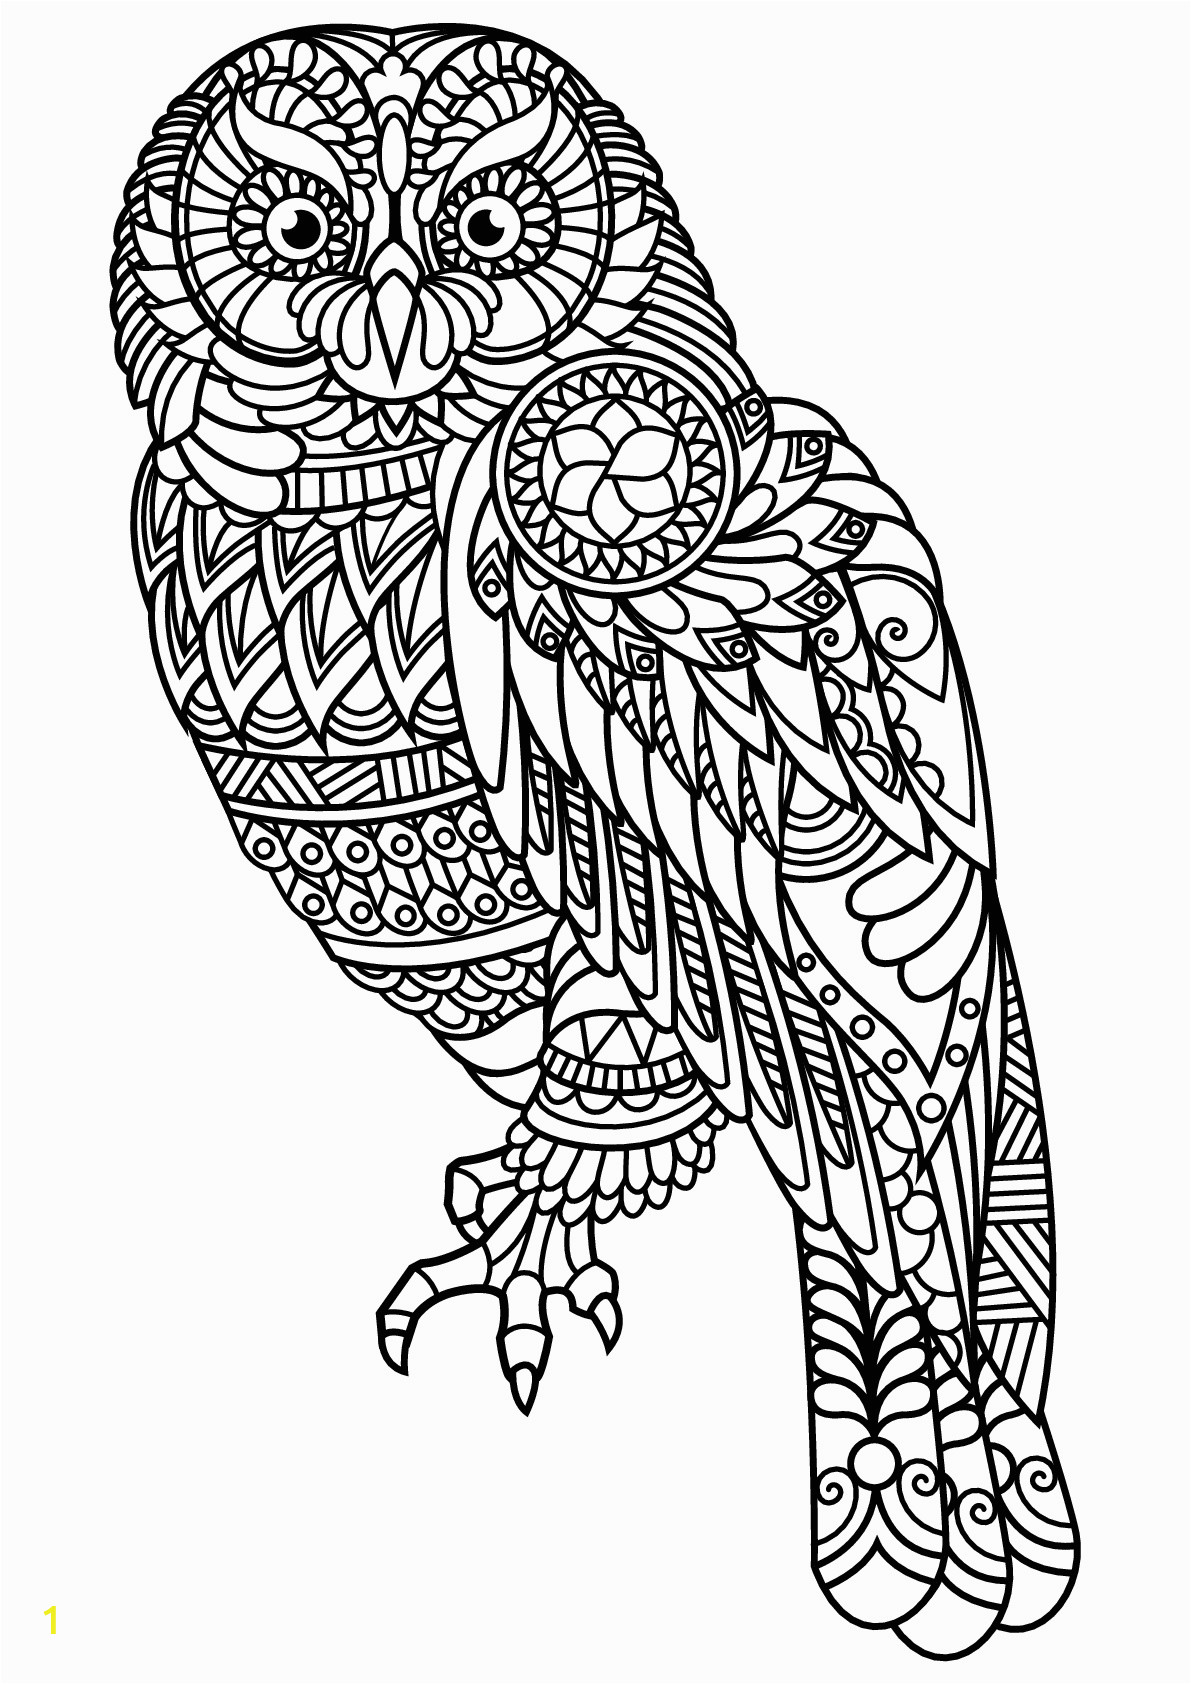 Free Owl Coloring Pages for Adults Free Book Owl Owls Adult Coloring Pages